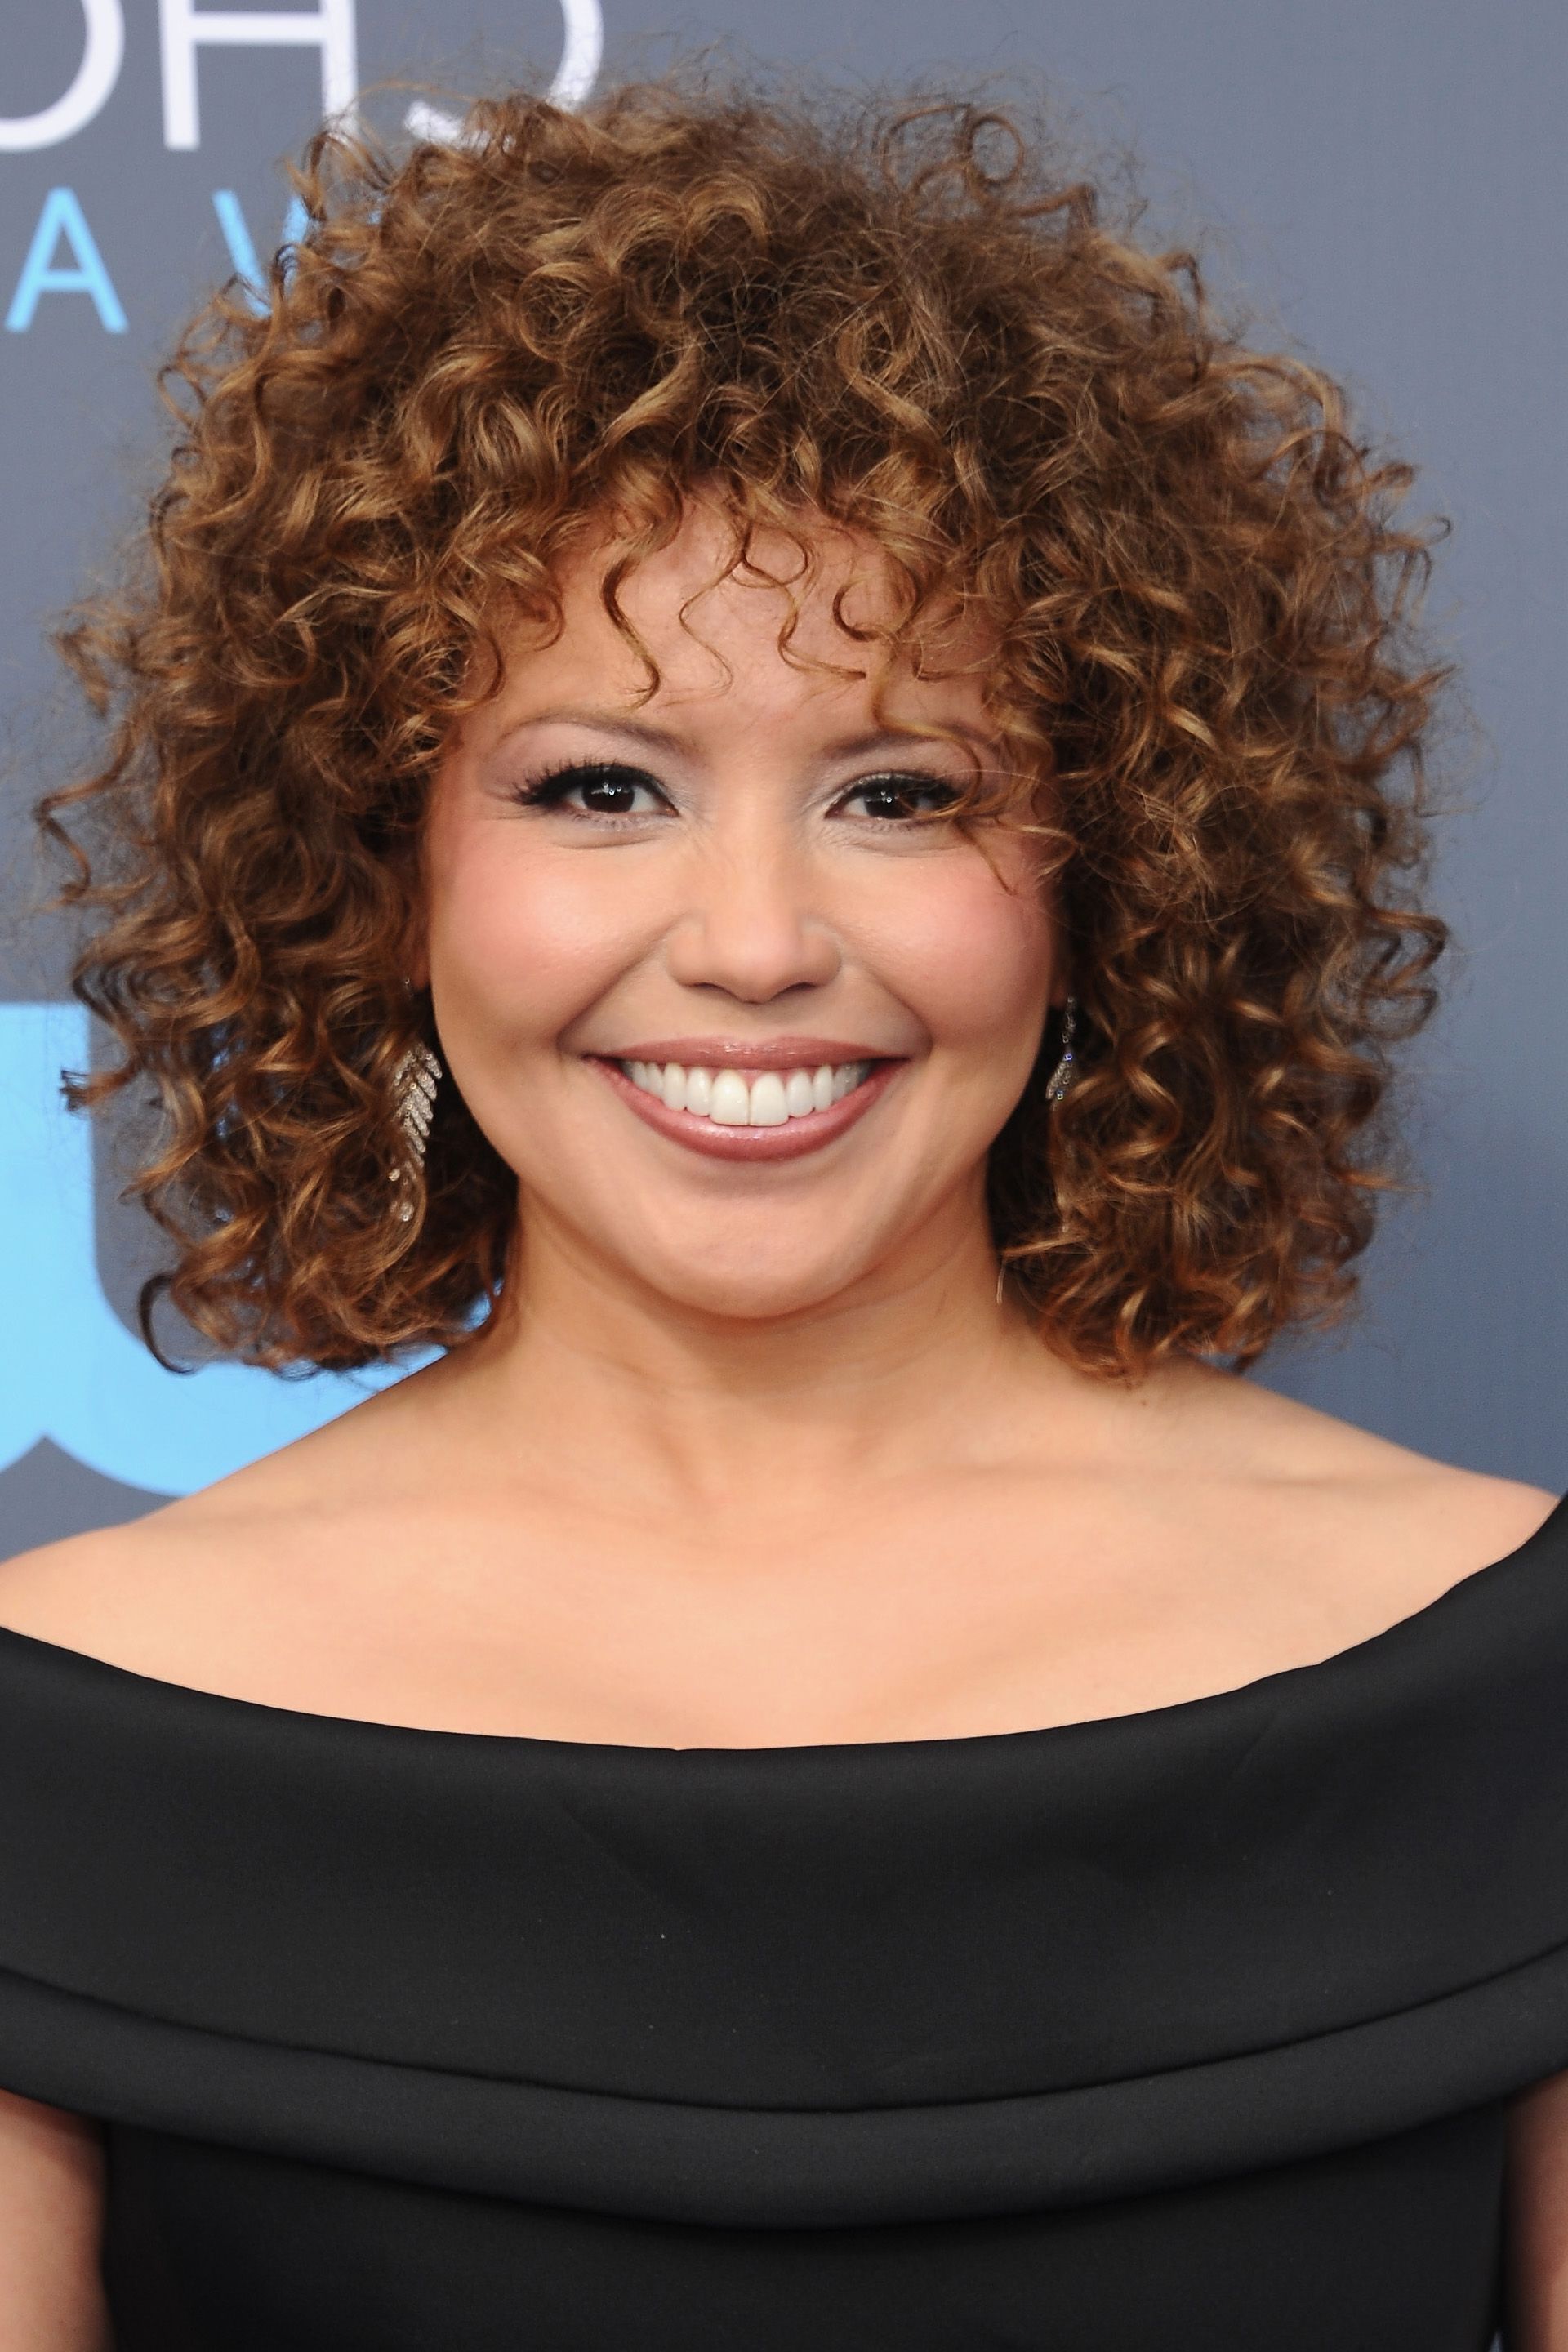 20 Celebrity Short Curly Hair Ideas – Short Haircuts And Hairstyles Intended For Big Curls Short Hairstyles (View 21 of 25)